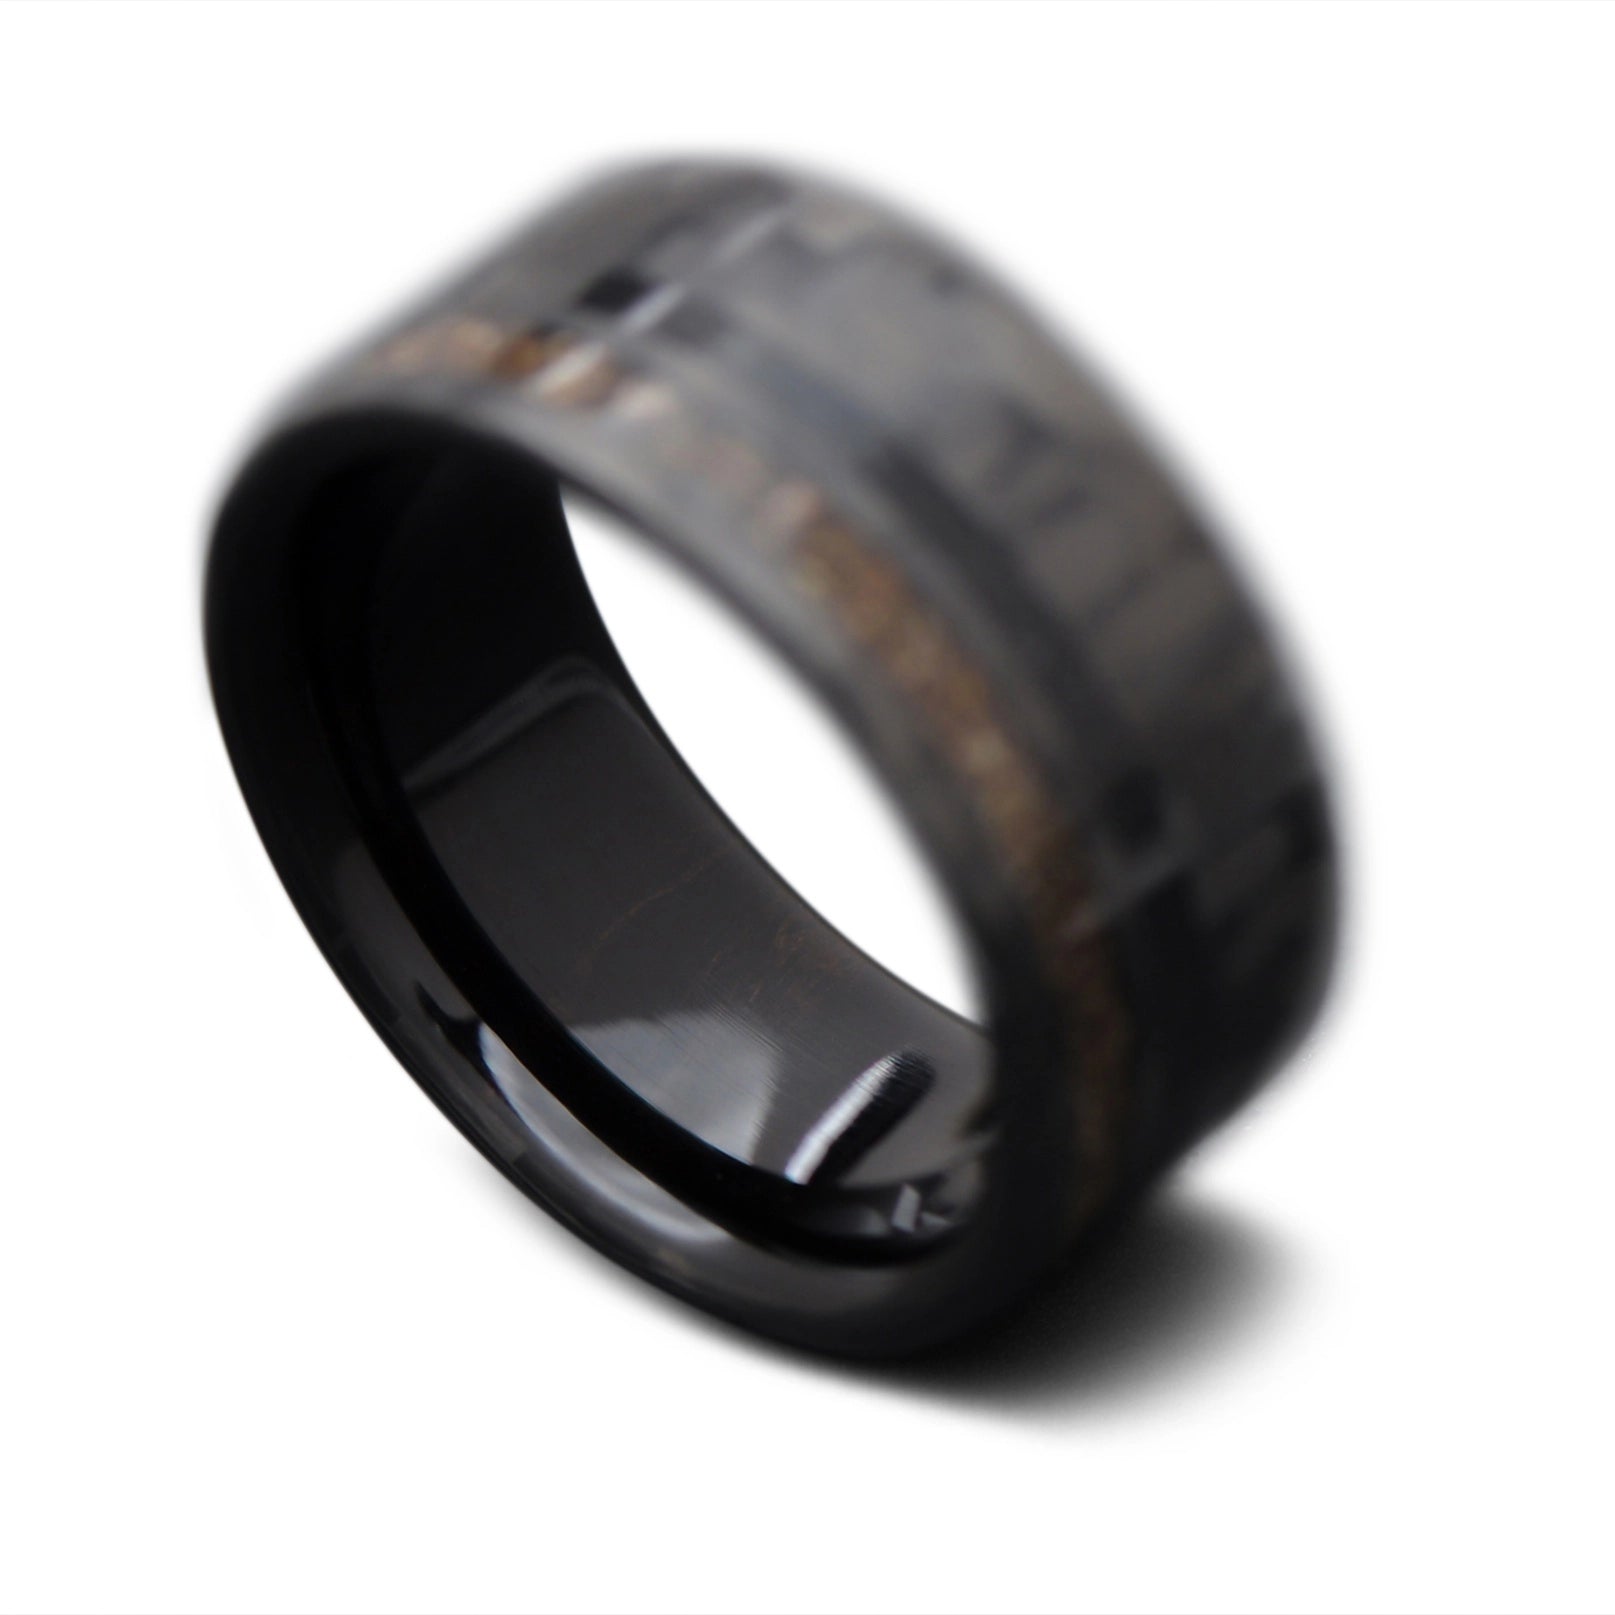  Back of CarbonTwill Core Ring with Black Onyx, Crushed T-Rex inlay and  African Blackwood inner sleeve, 10mm -THE SEEKER